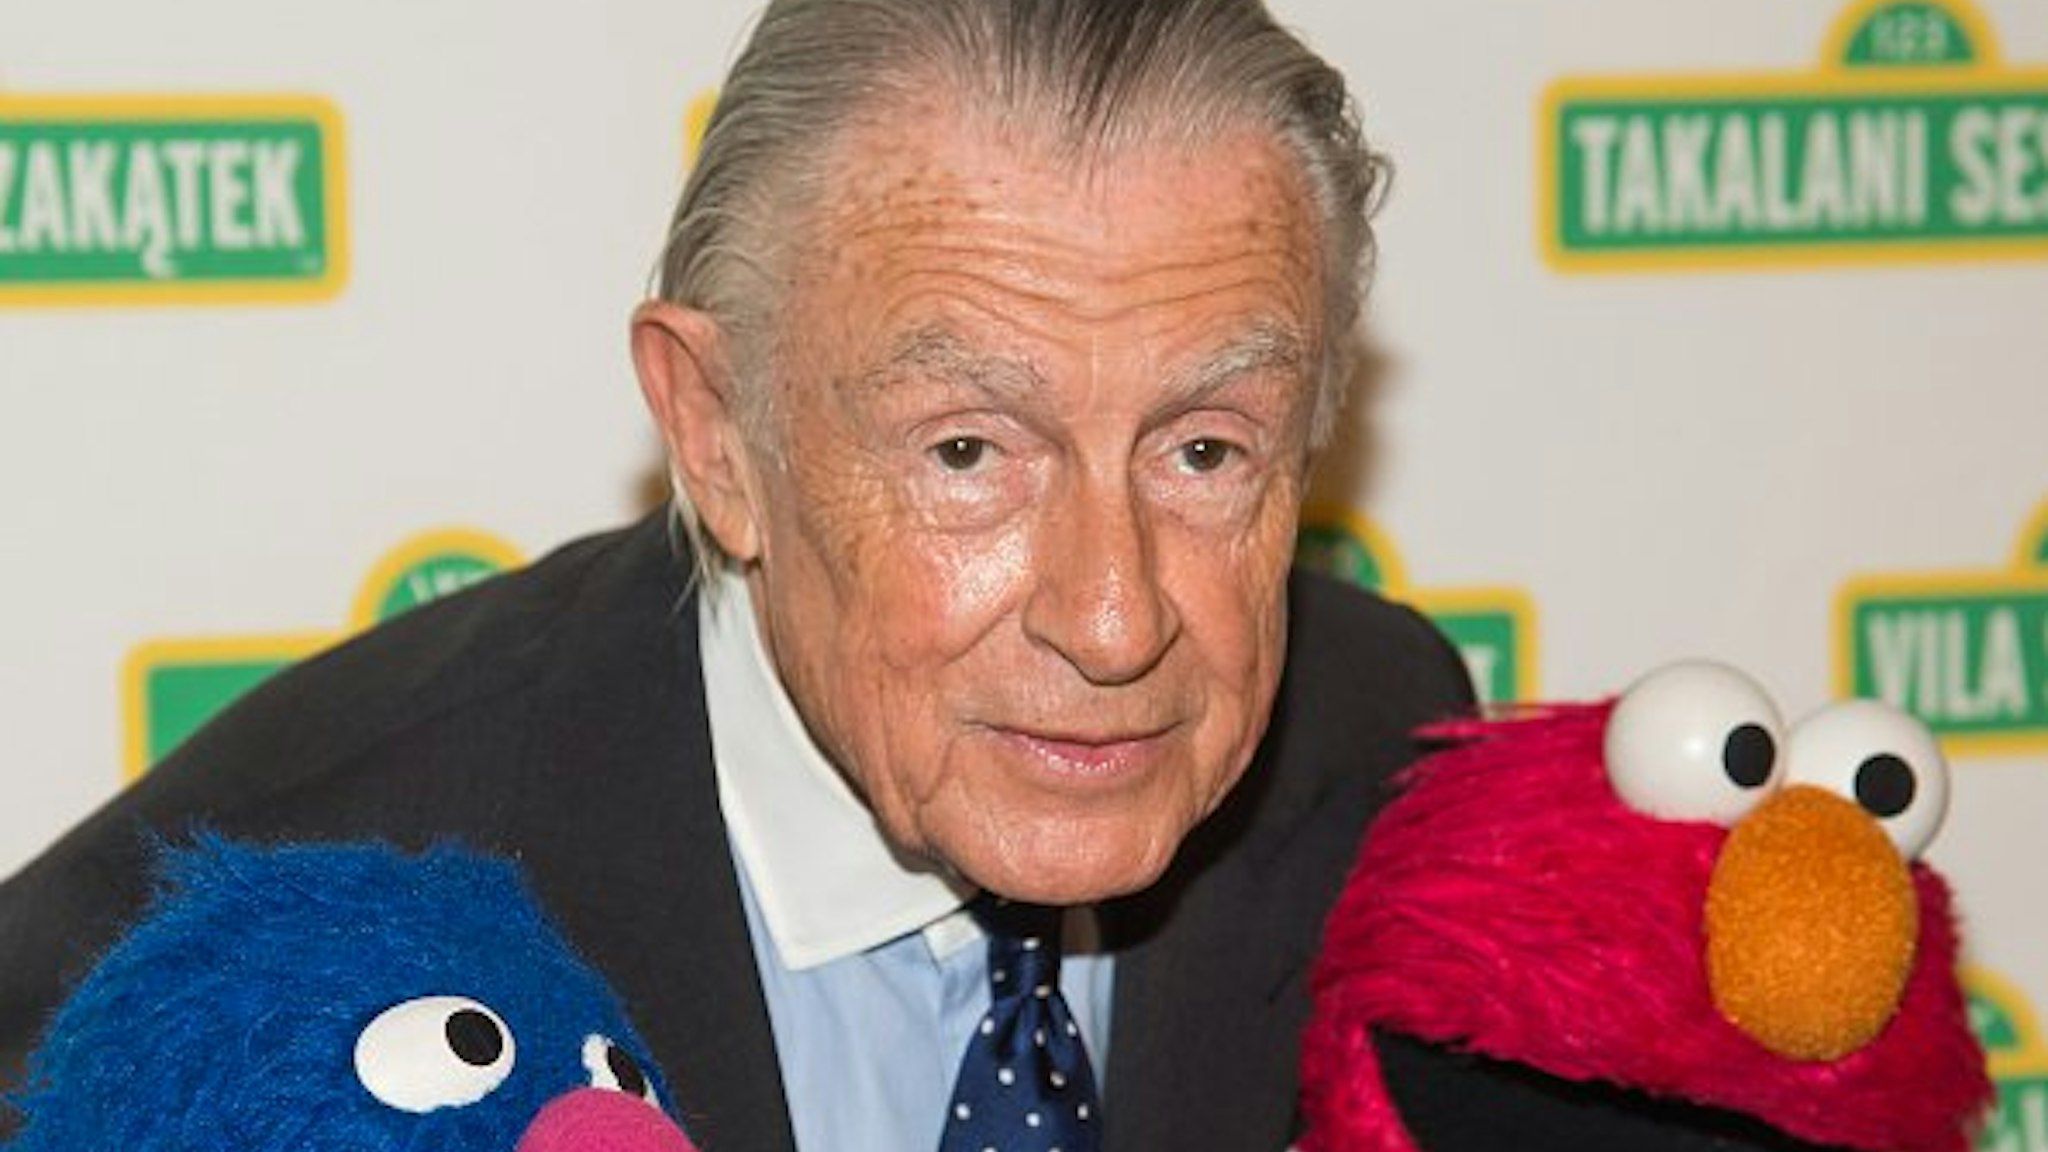 Director Joel Schumacher attends the Sesame Workshop's 13th Annual Benefit Gala at Cipriani 42nd Street on May 27, 2015 in New York City.